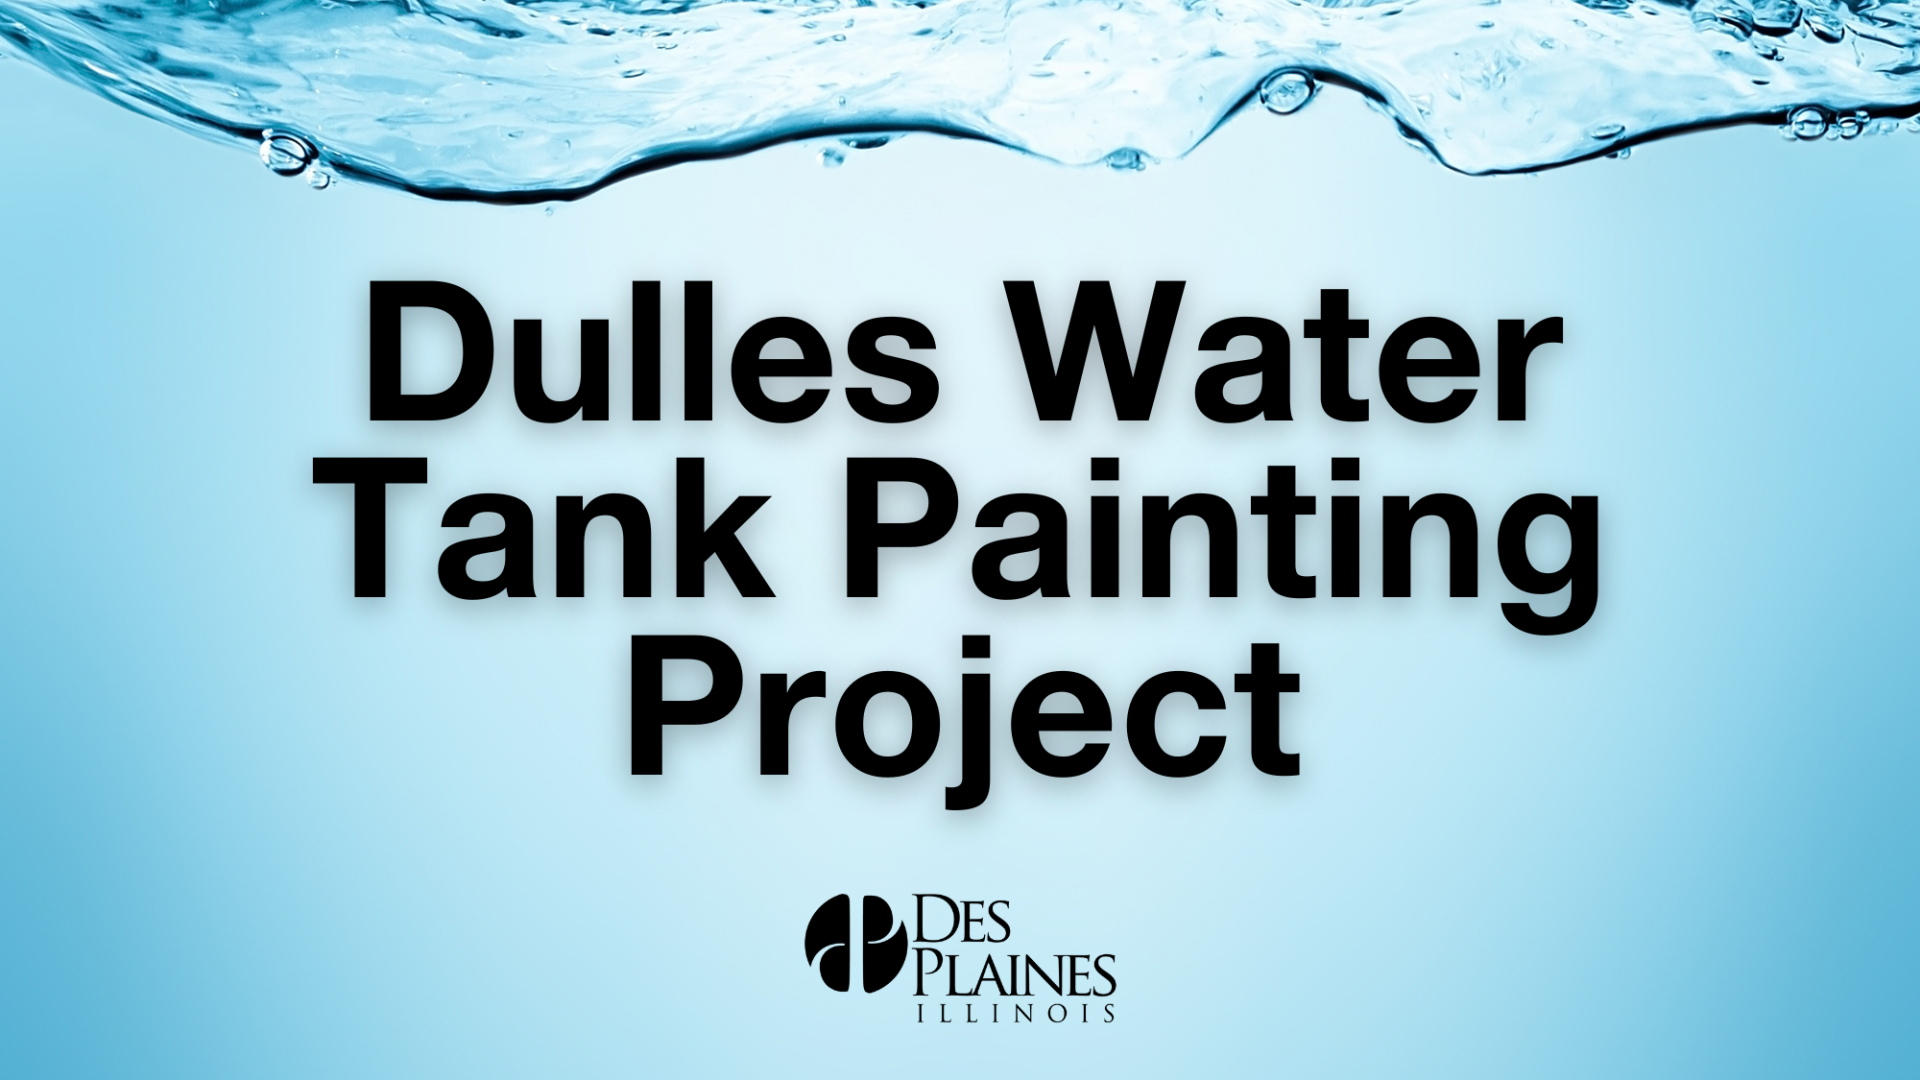 Dulles Water Tank Painting Project